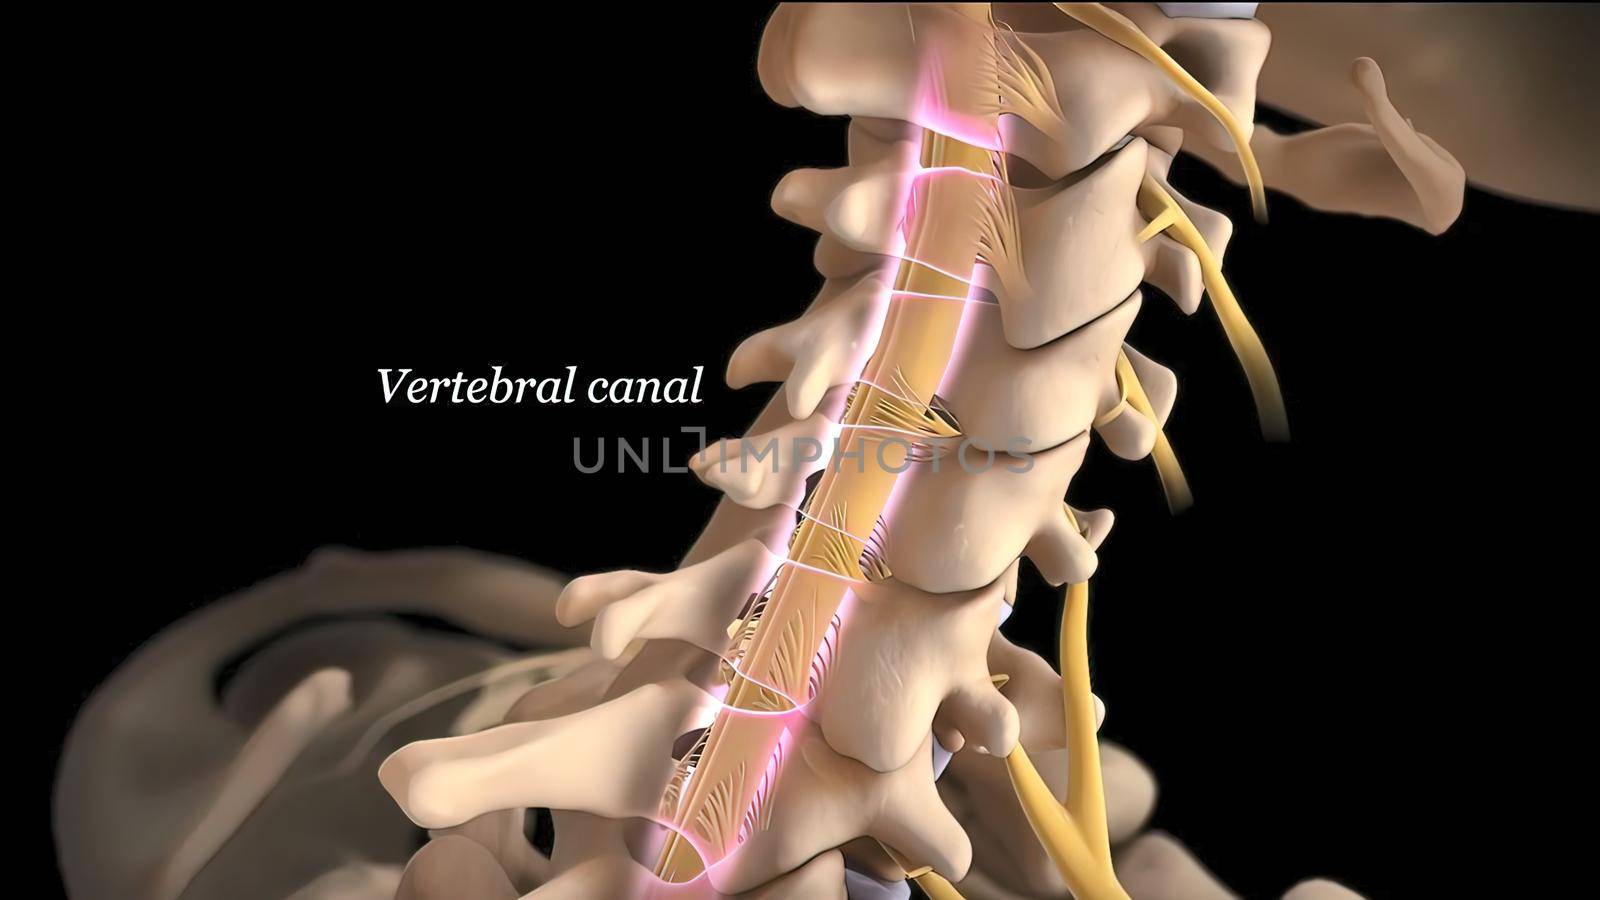 Brain and spinal system, vertebral canal by creativepic